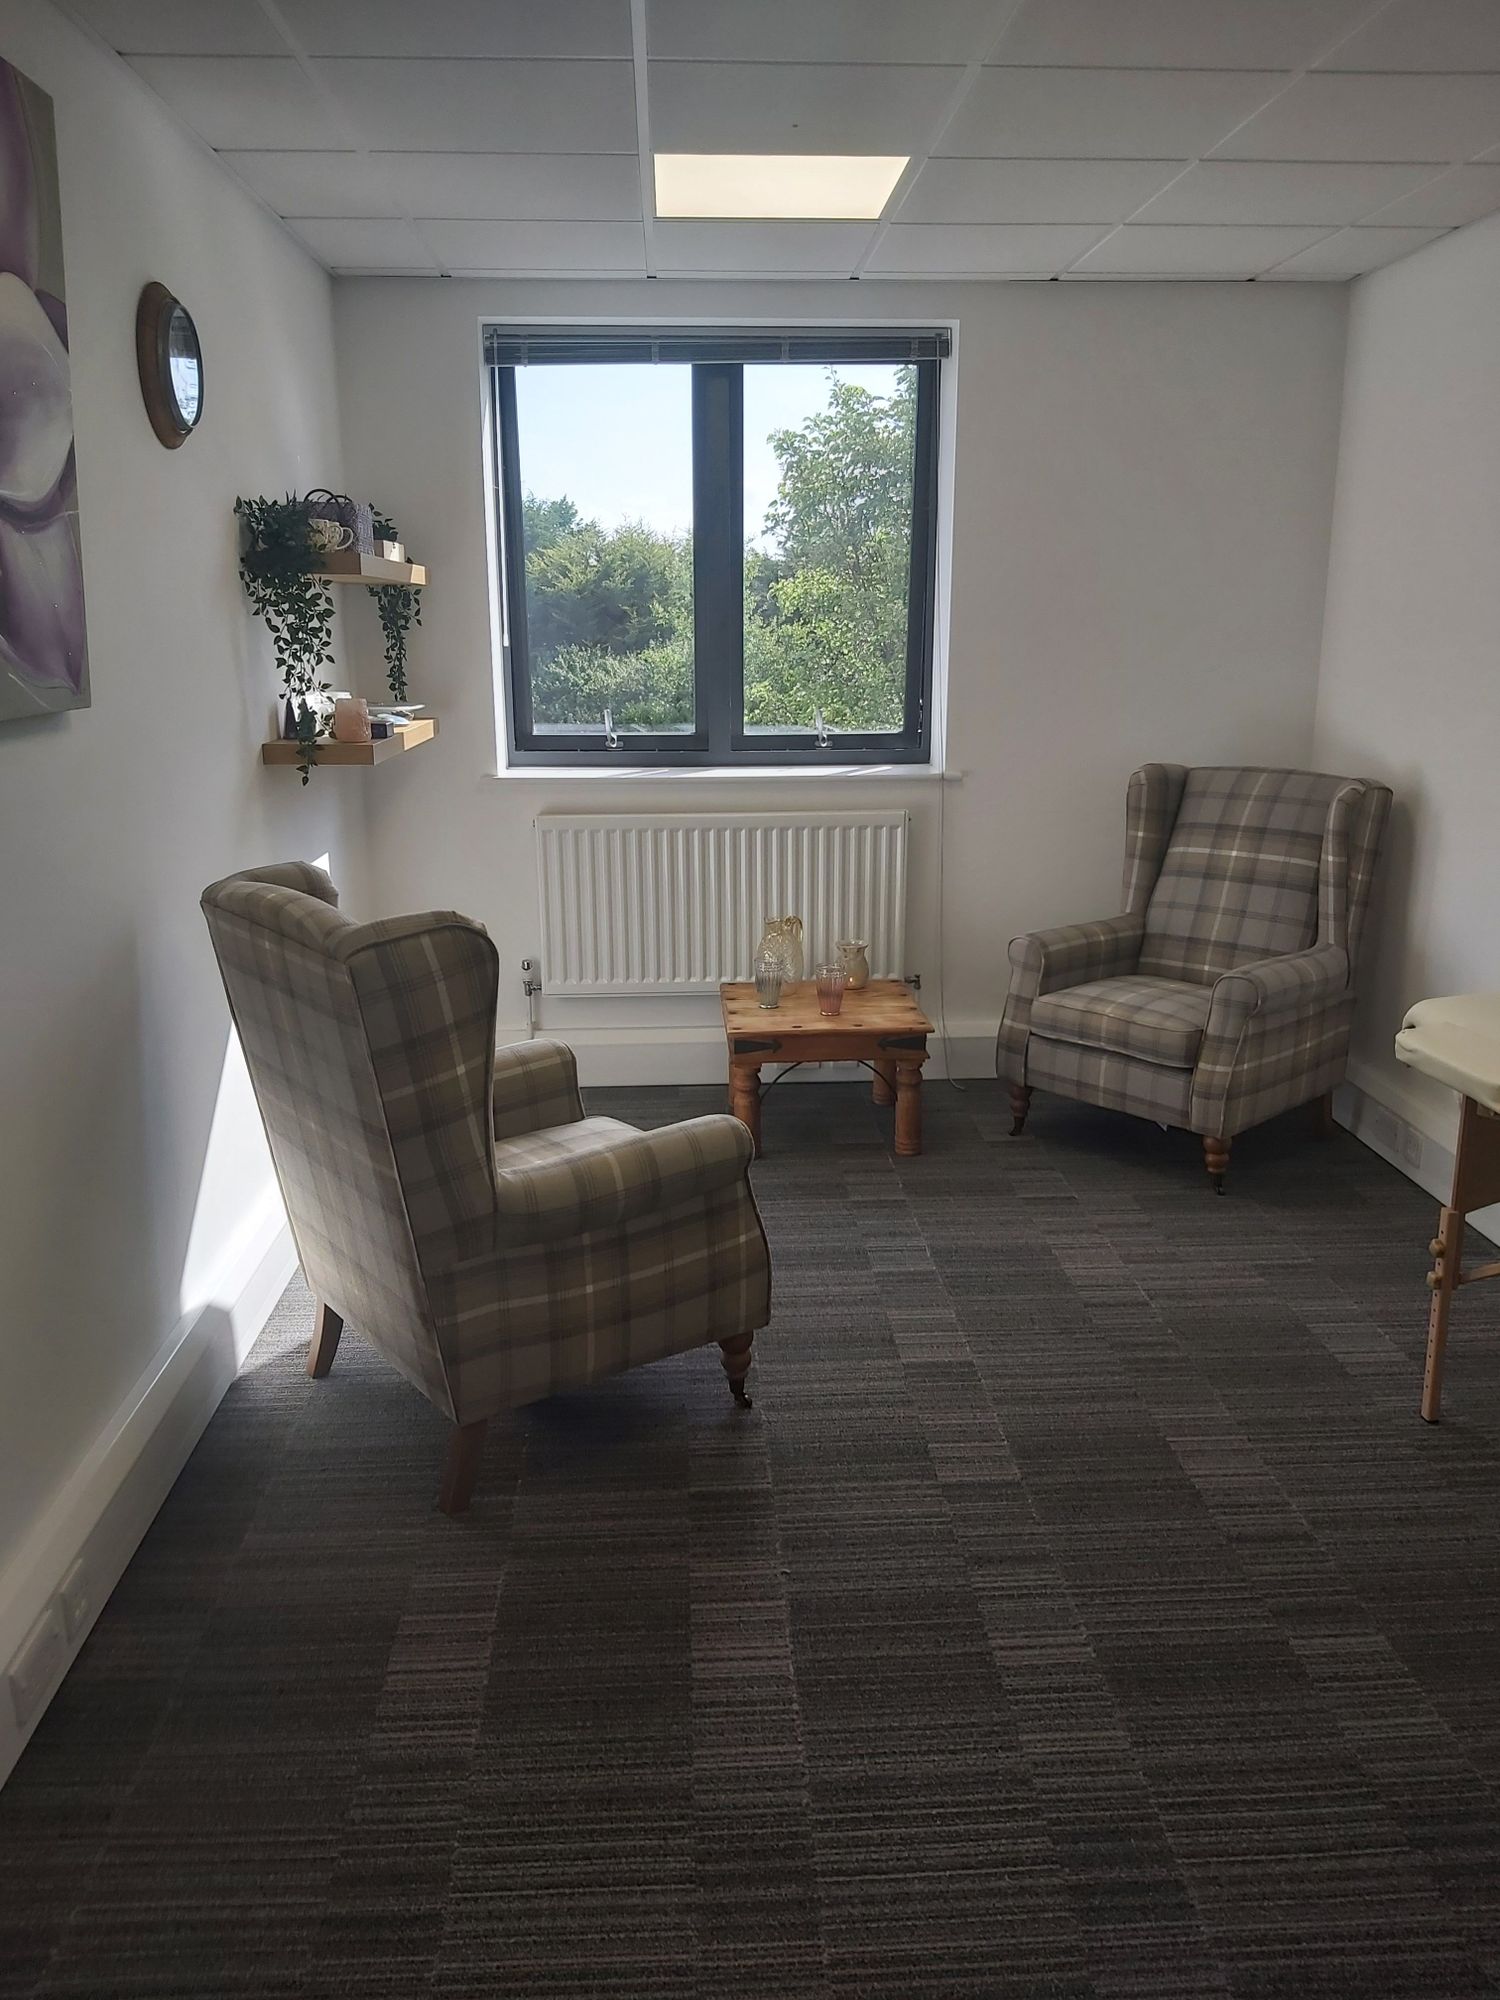 Gallery Photo of The energy in my counselling room feels just right. It is light a and airy room with a lovely view of the trees.